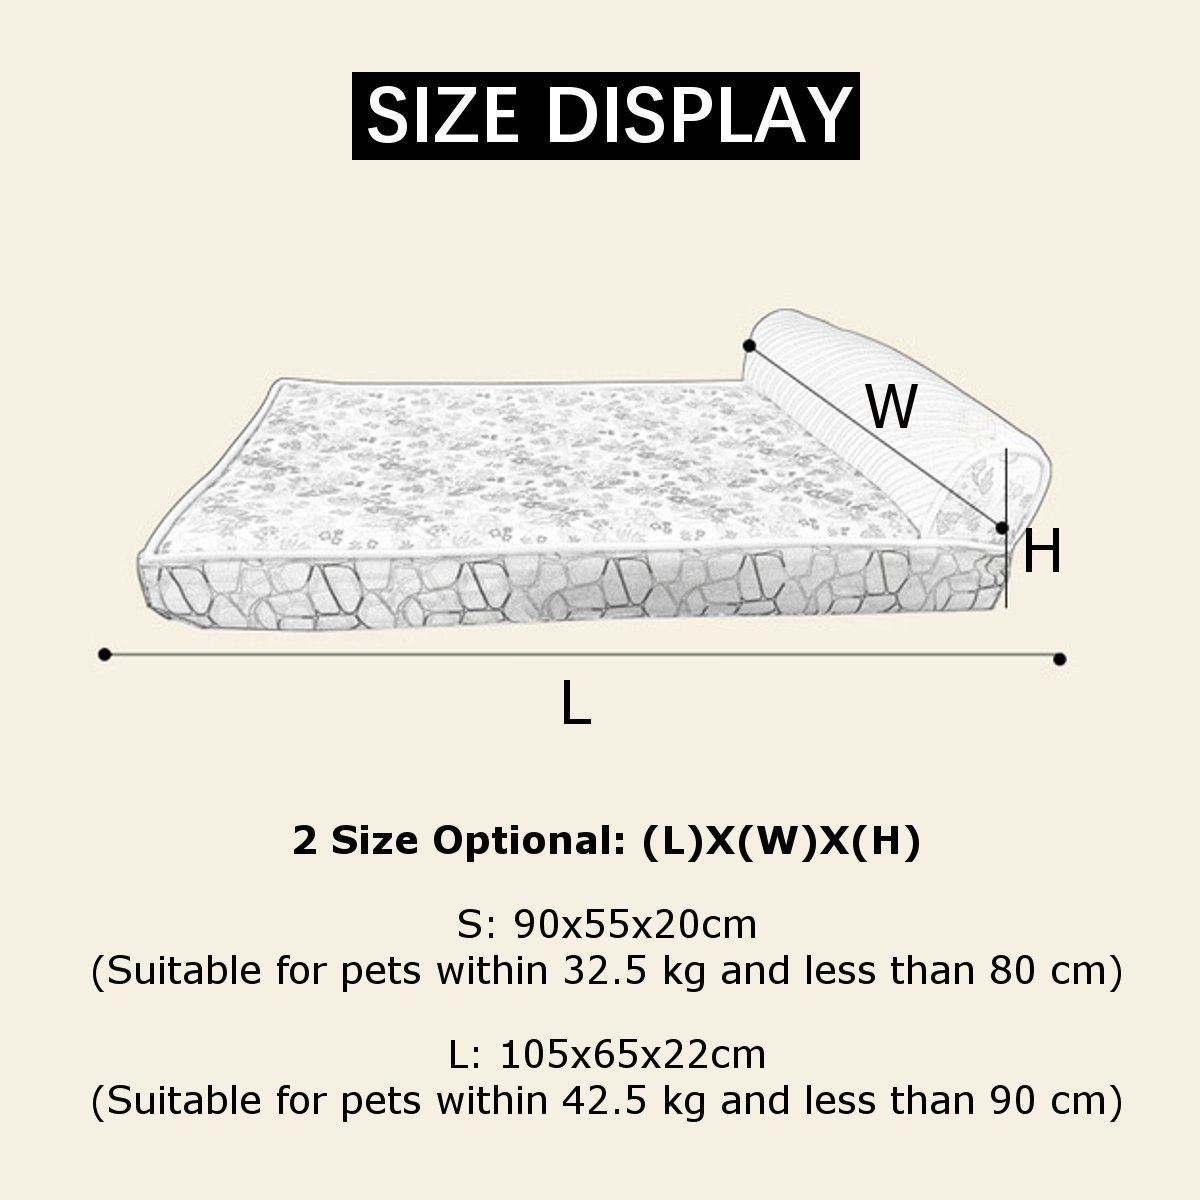 Sofa-Shape-Large-Dog-Bed-Multicolor-Soft-Waterproof-Pet-Sleeping-Bed-Mat-House-Kennels-1479299-6